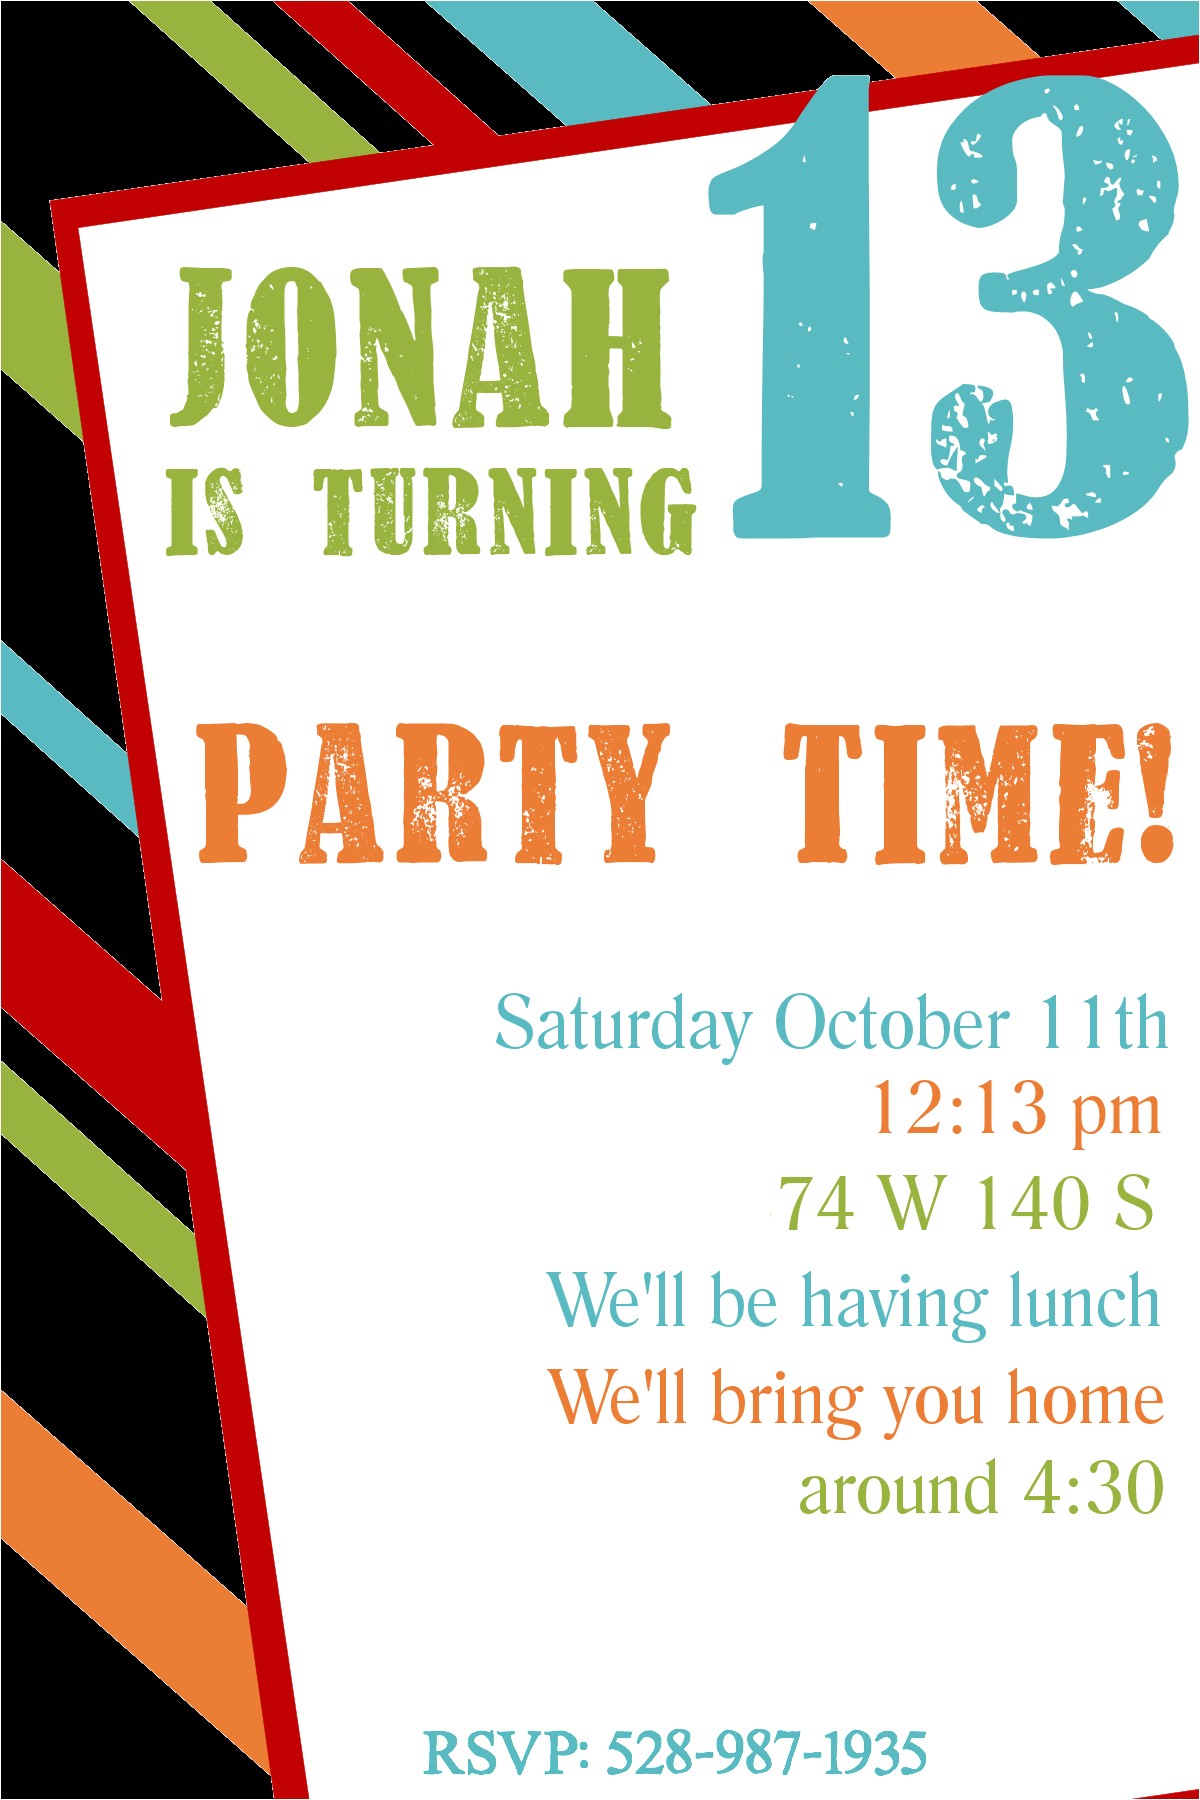 Free Birthday Party Invitation Templates with Photo Free Printable Birthday Invitation Templates